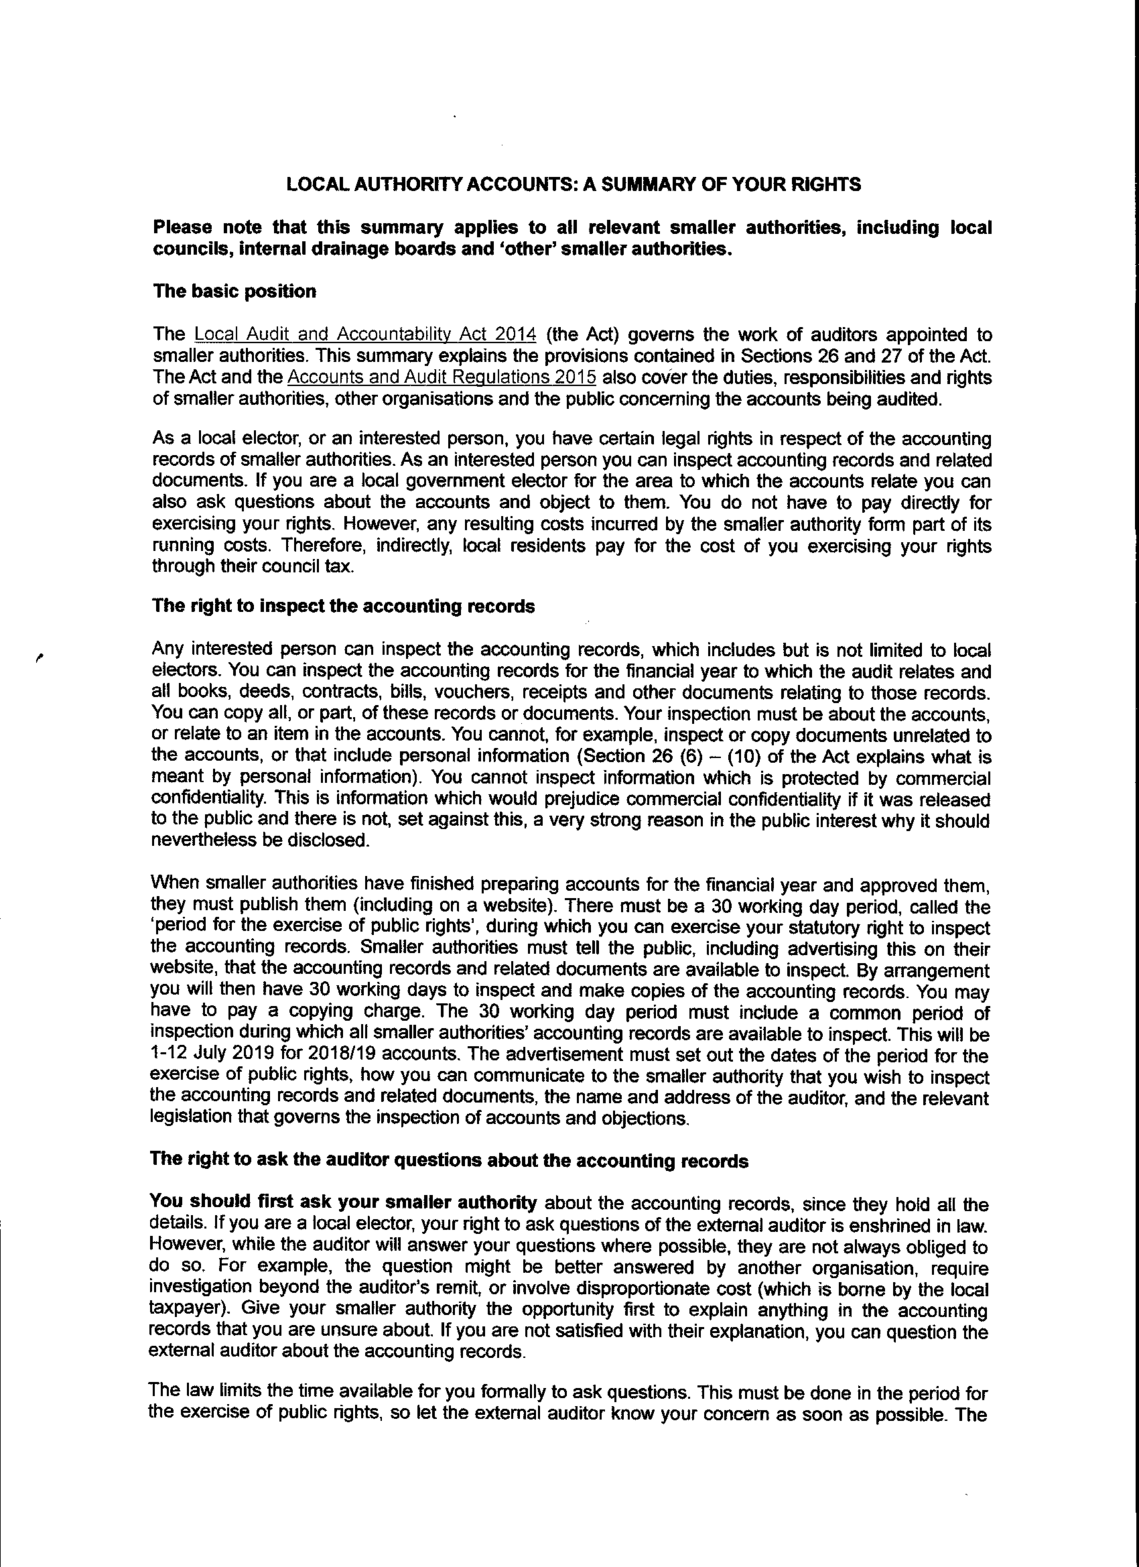 Public Rights explanatory notes page 1